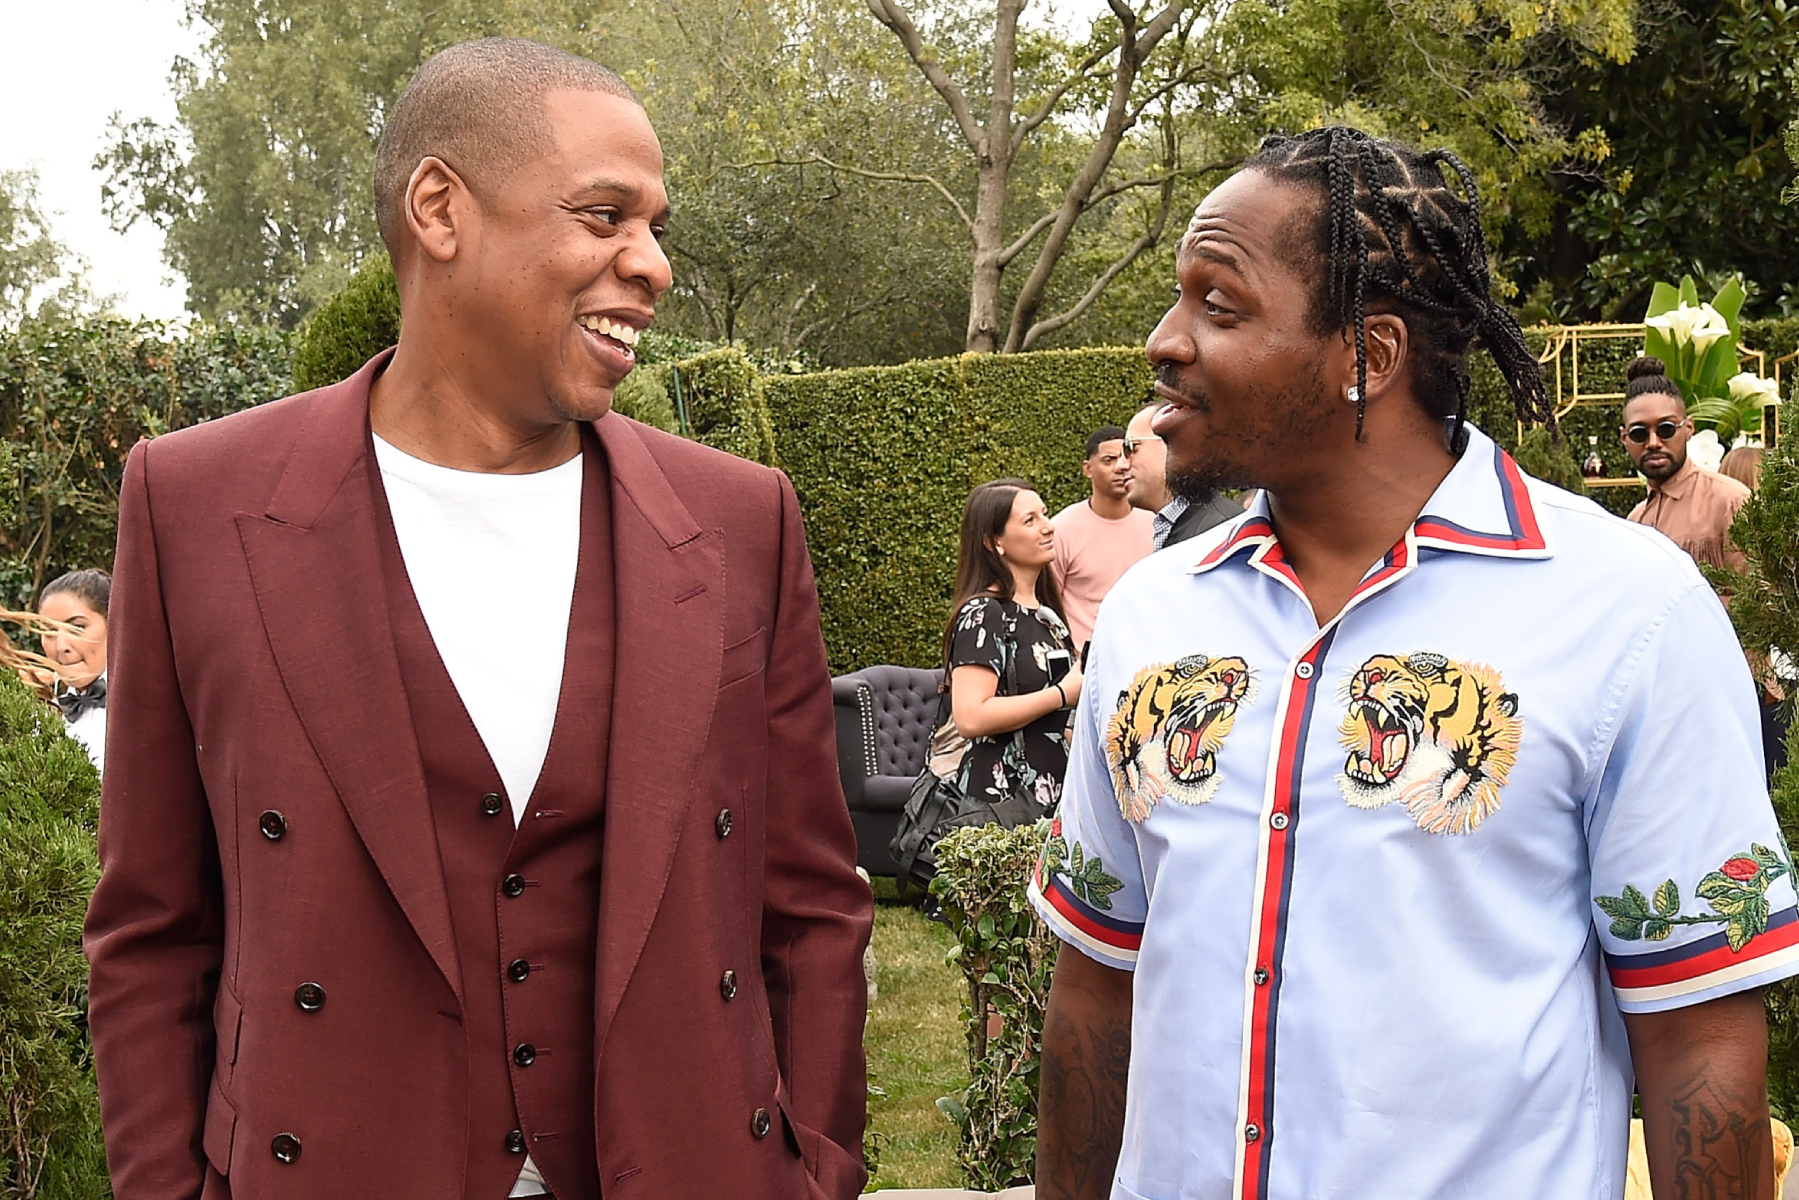 Listen to Jay-Z Join Pusha T on ‘Neck and Wrist’